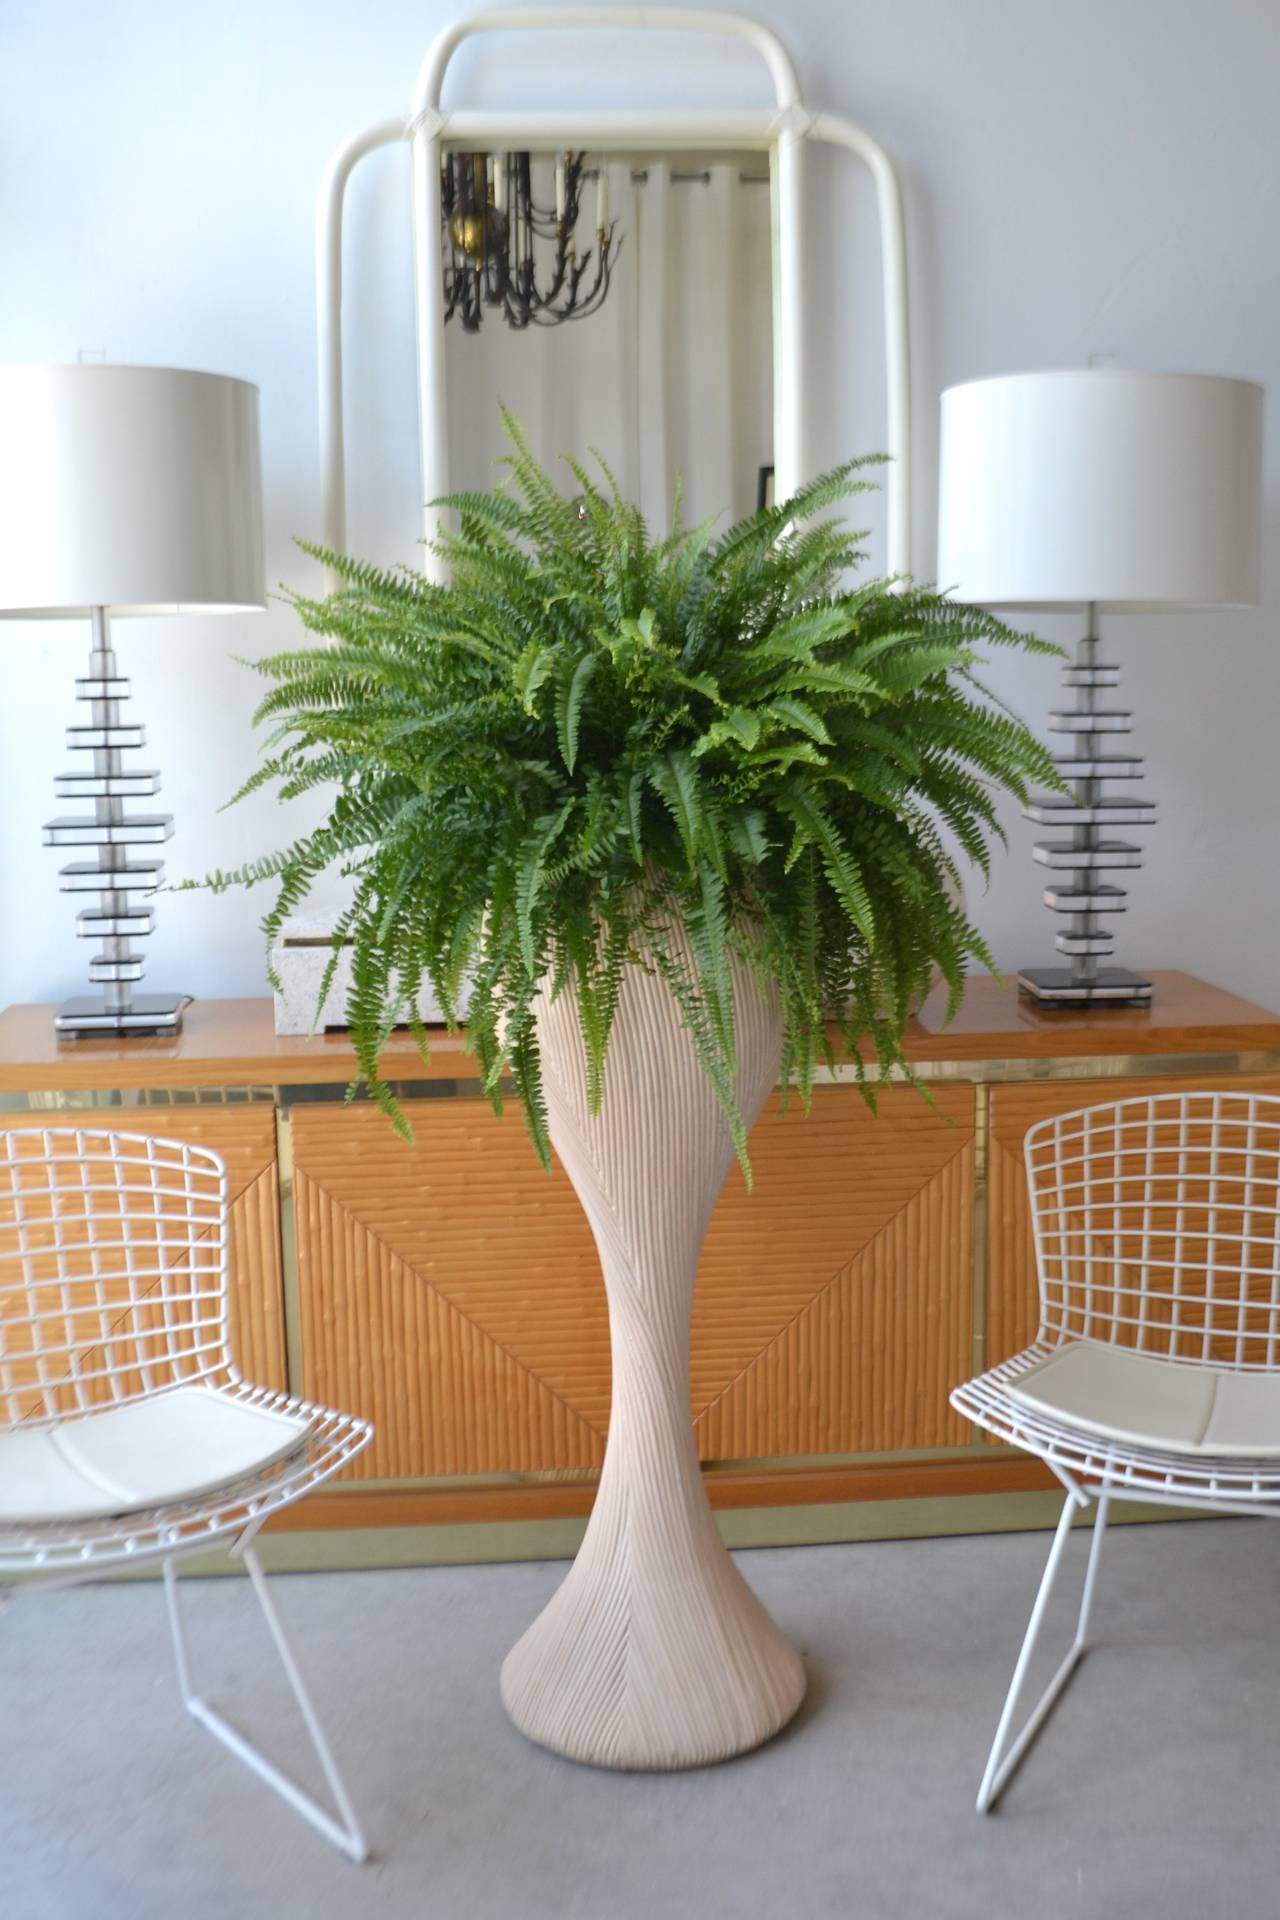 Sculptural cerused bent reed plant stand, c. 1970s -1980s. This substantial custom crafted pedestal / plant stand is exquisitely designed of applied cut reed strands over wooden form. 

Overall dimensions:

42.5